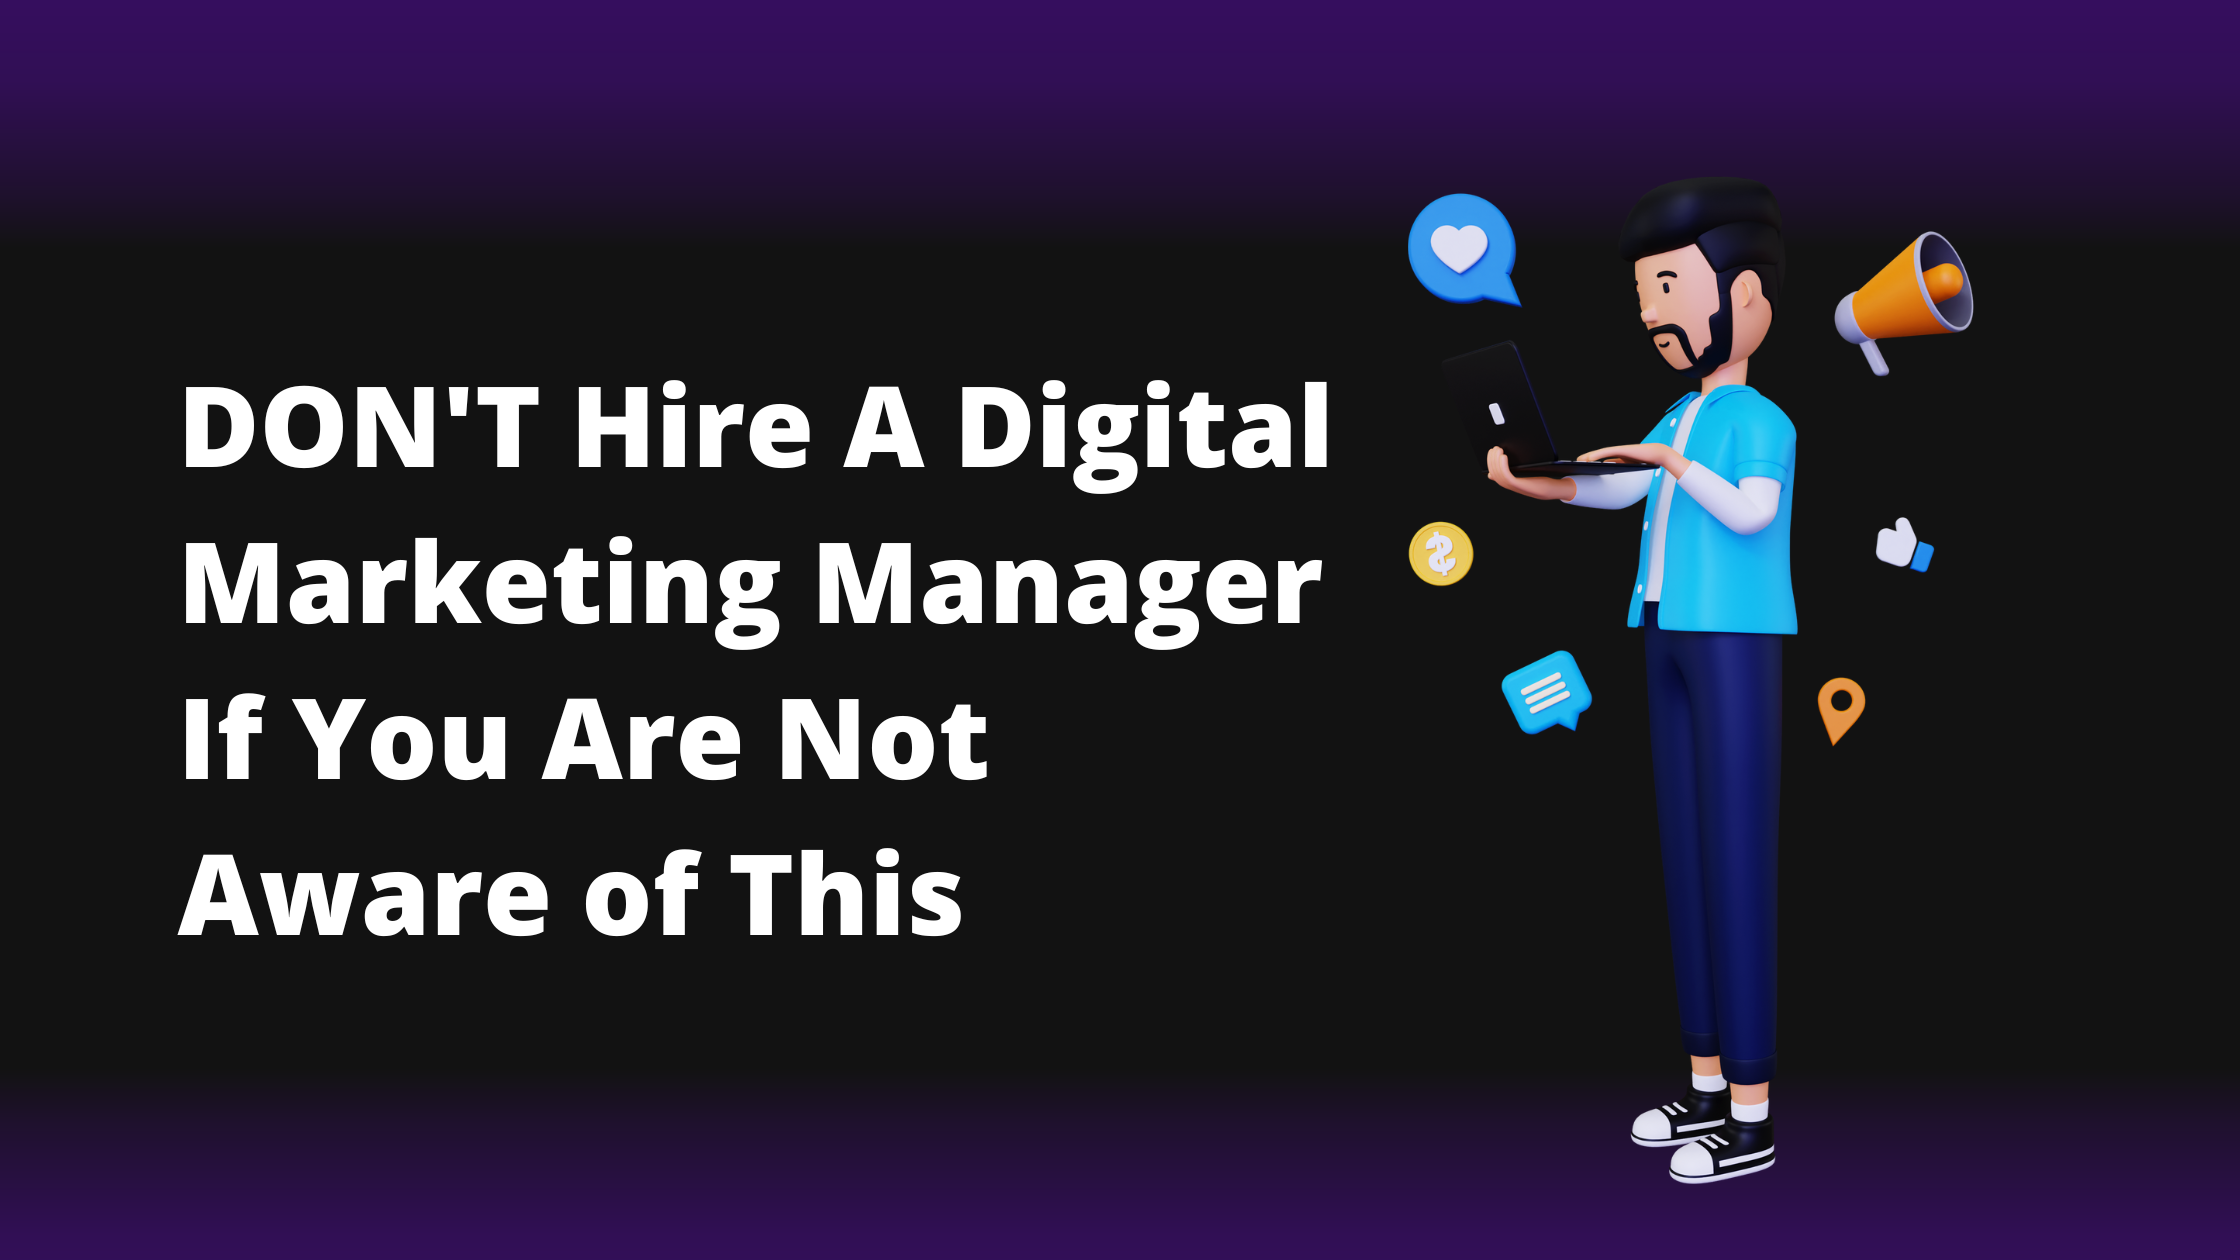 Don’t Hire A Digital Marketing Manager If You Are Not Aware About This